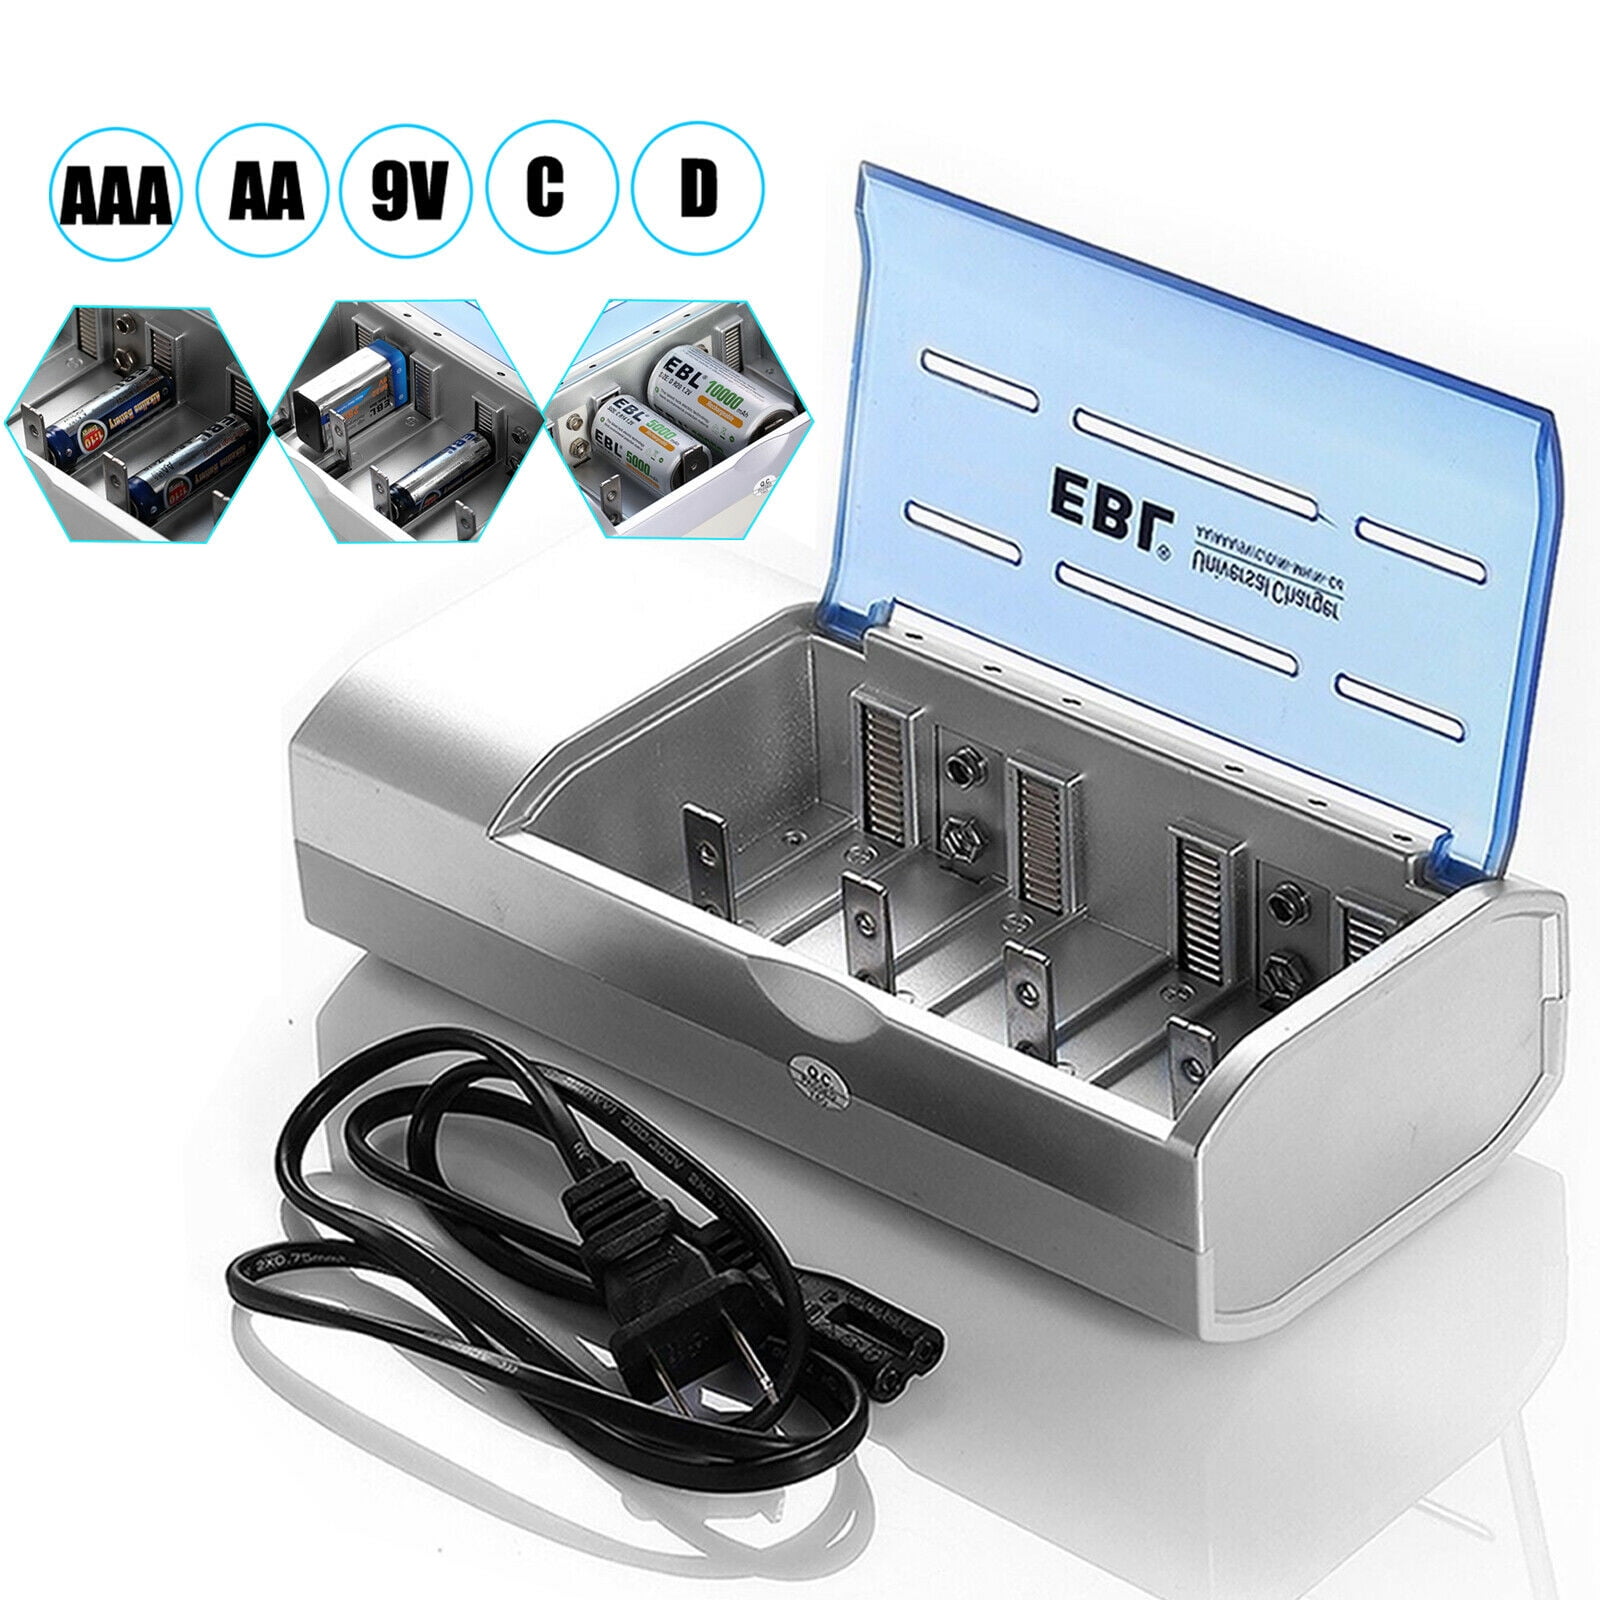 Universal Multi AA AAA C D Size 9V Charger for NiMH NiCD Rechargeable Battery 